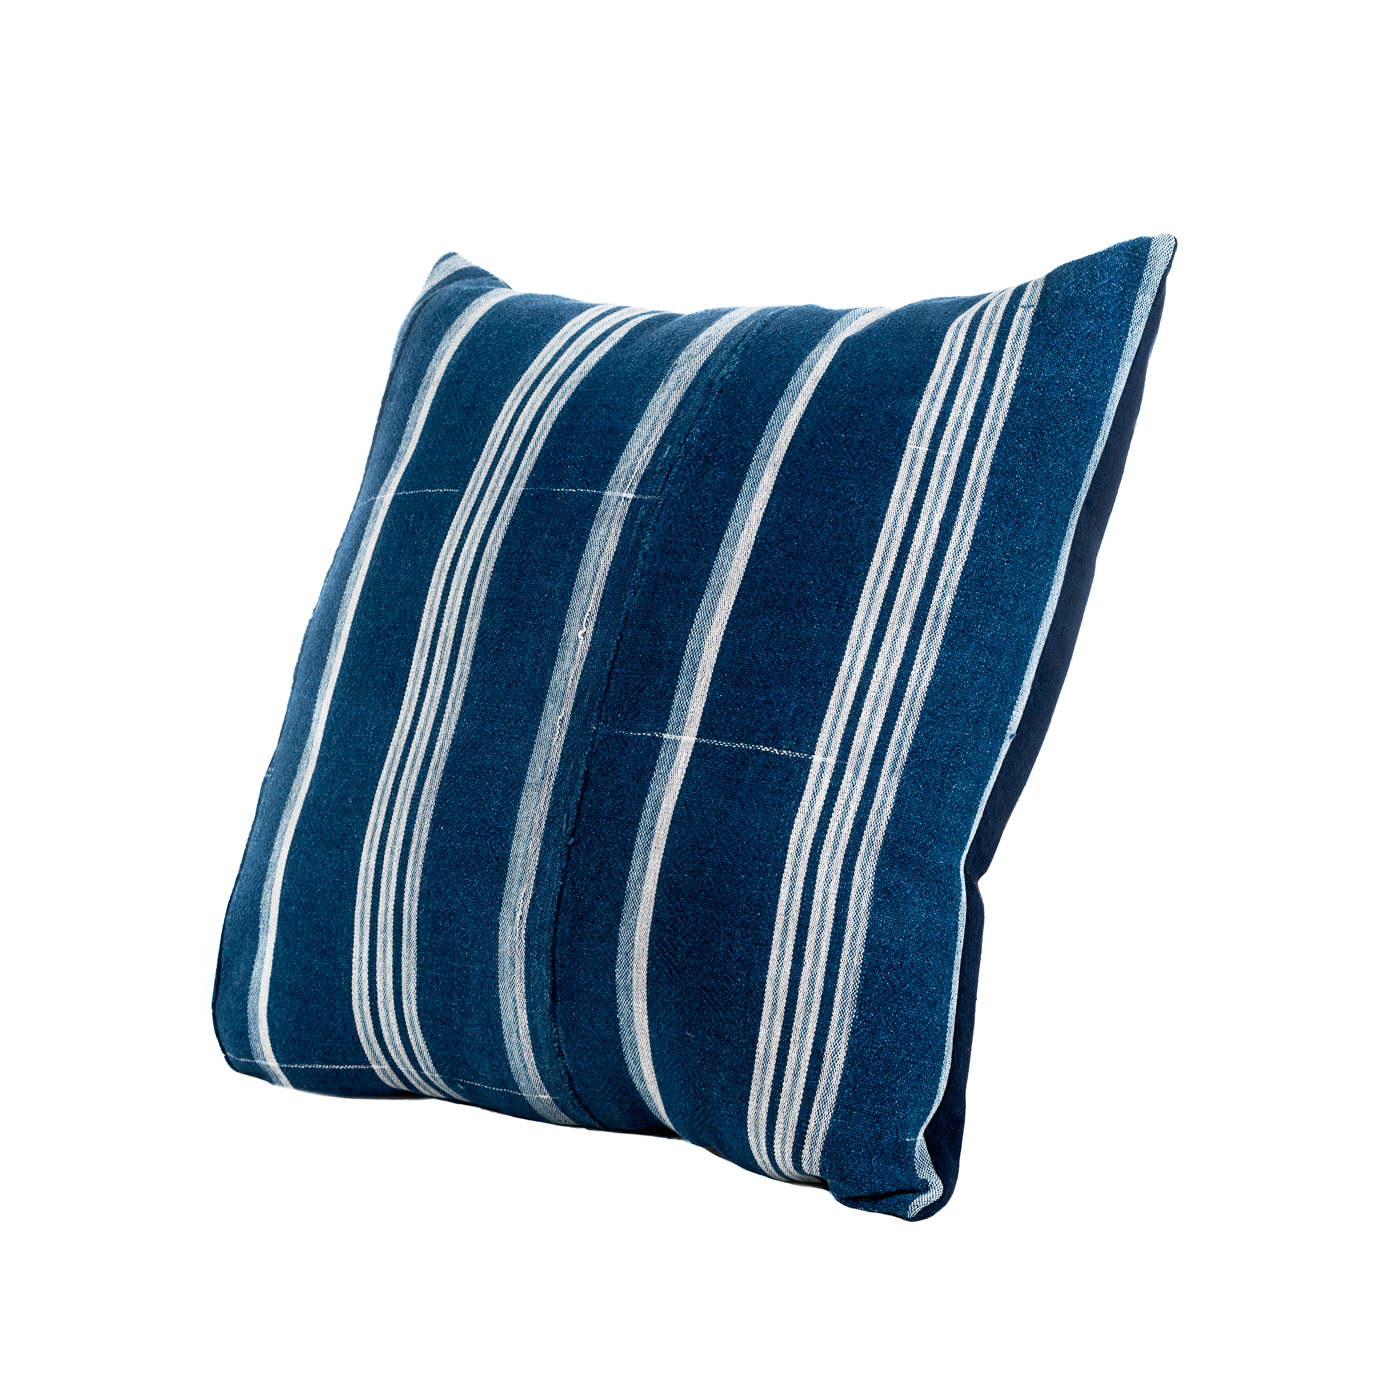 Handmade Blue African Pillow with White Stripes